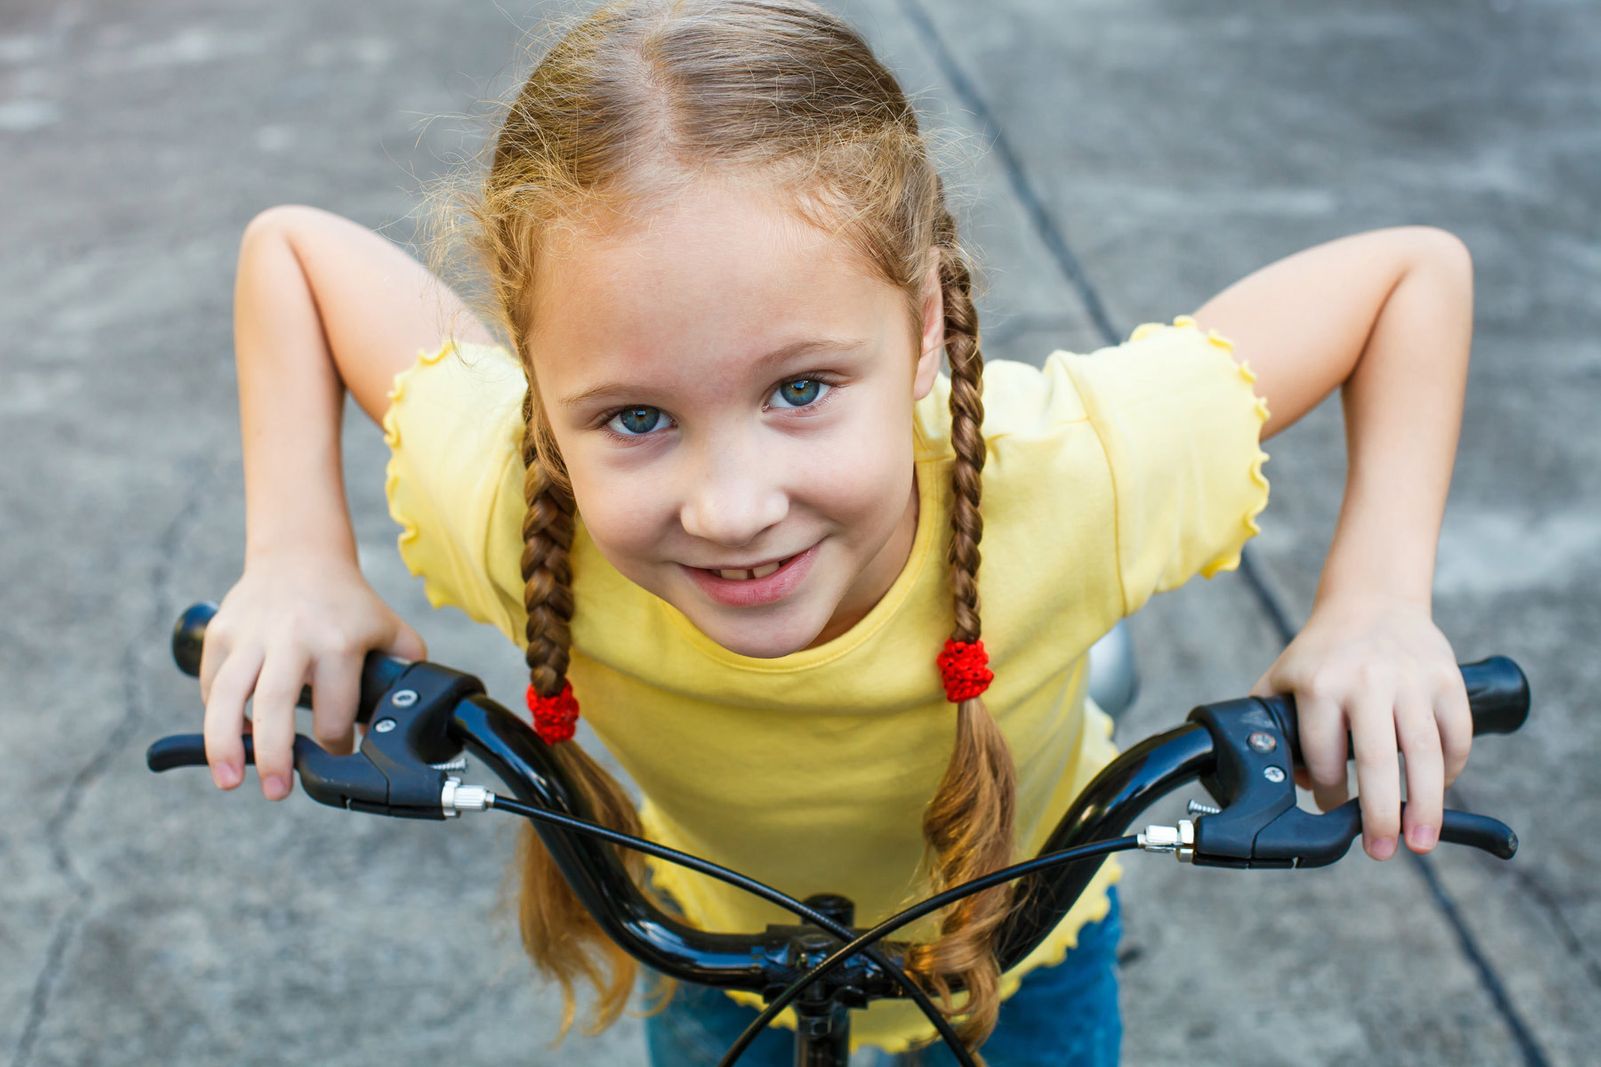 Image of a girl on a bike